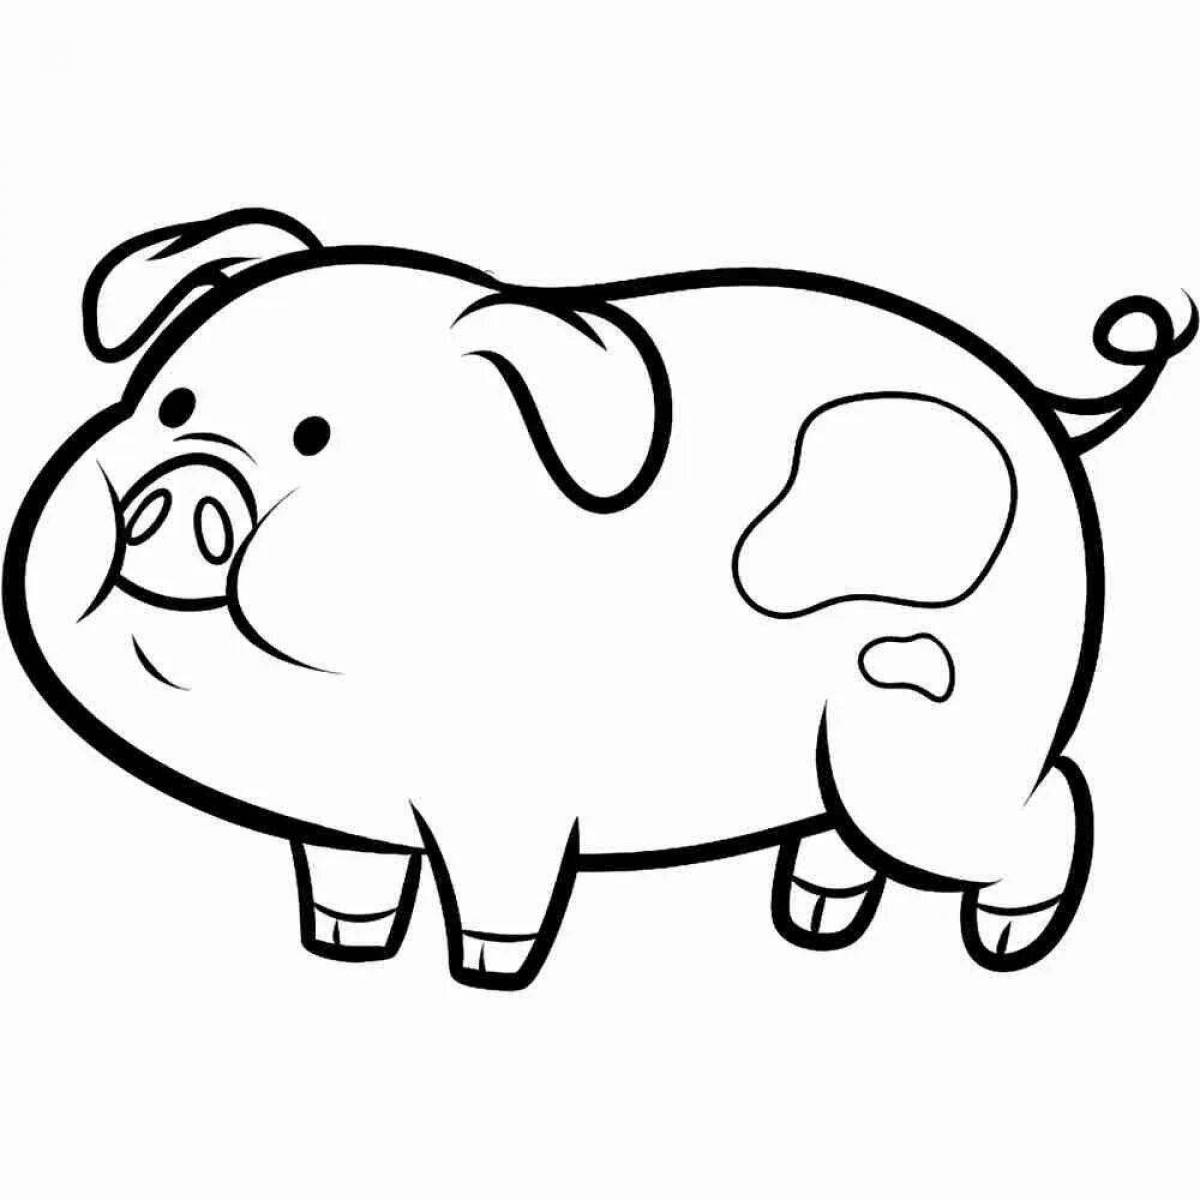 Coloring page funny mini pig